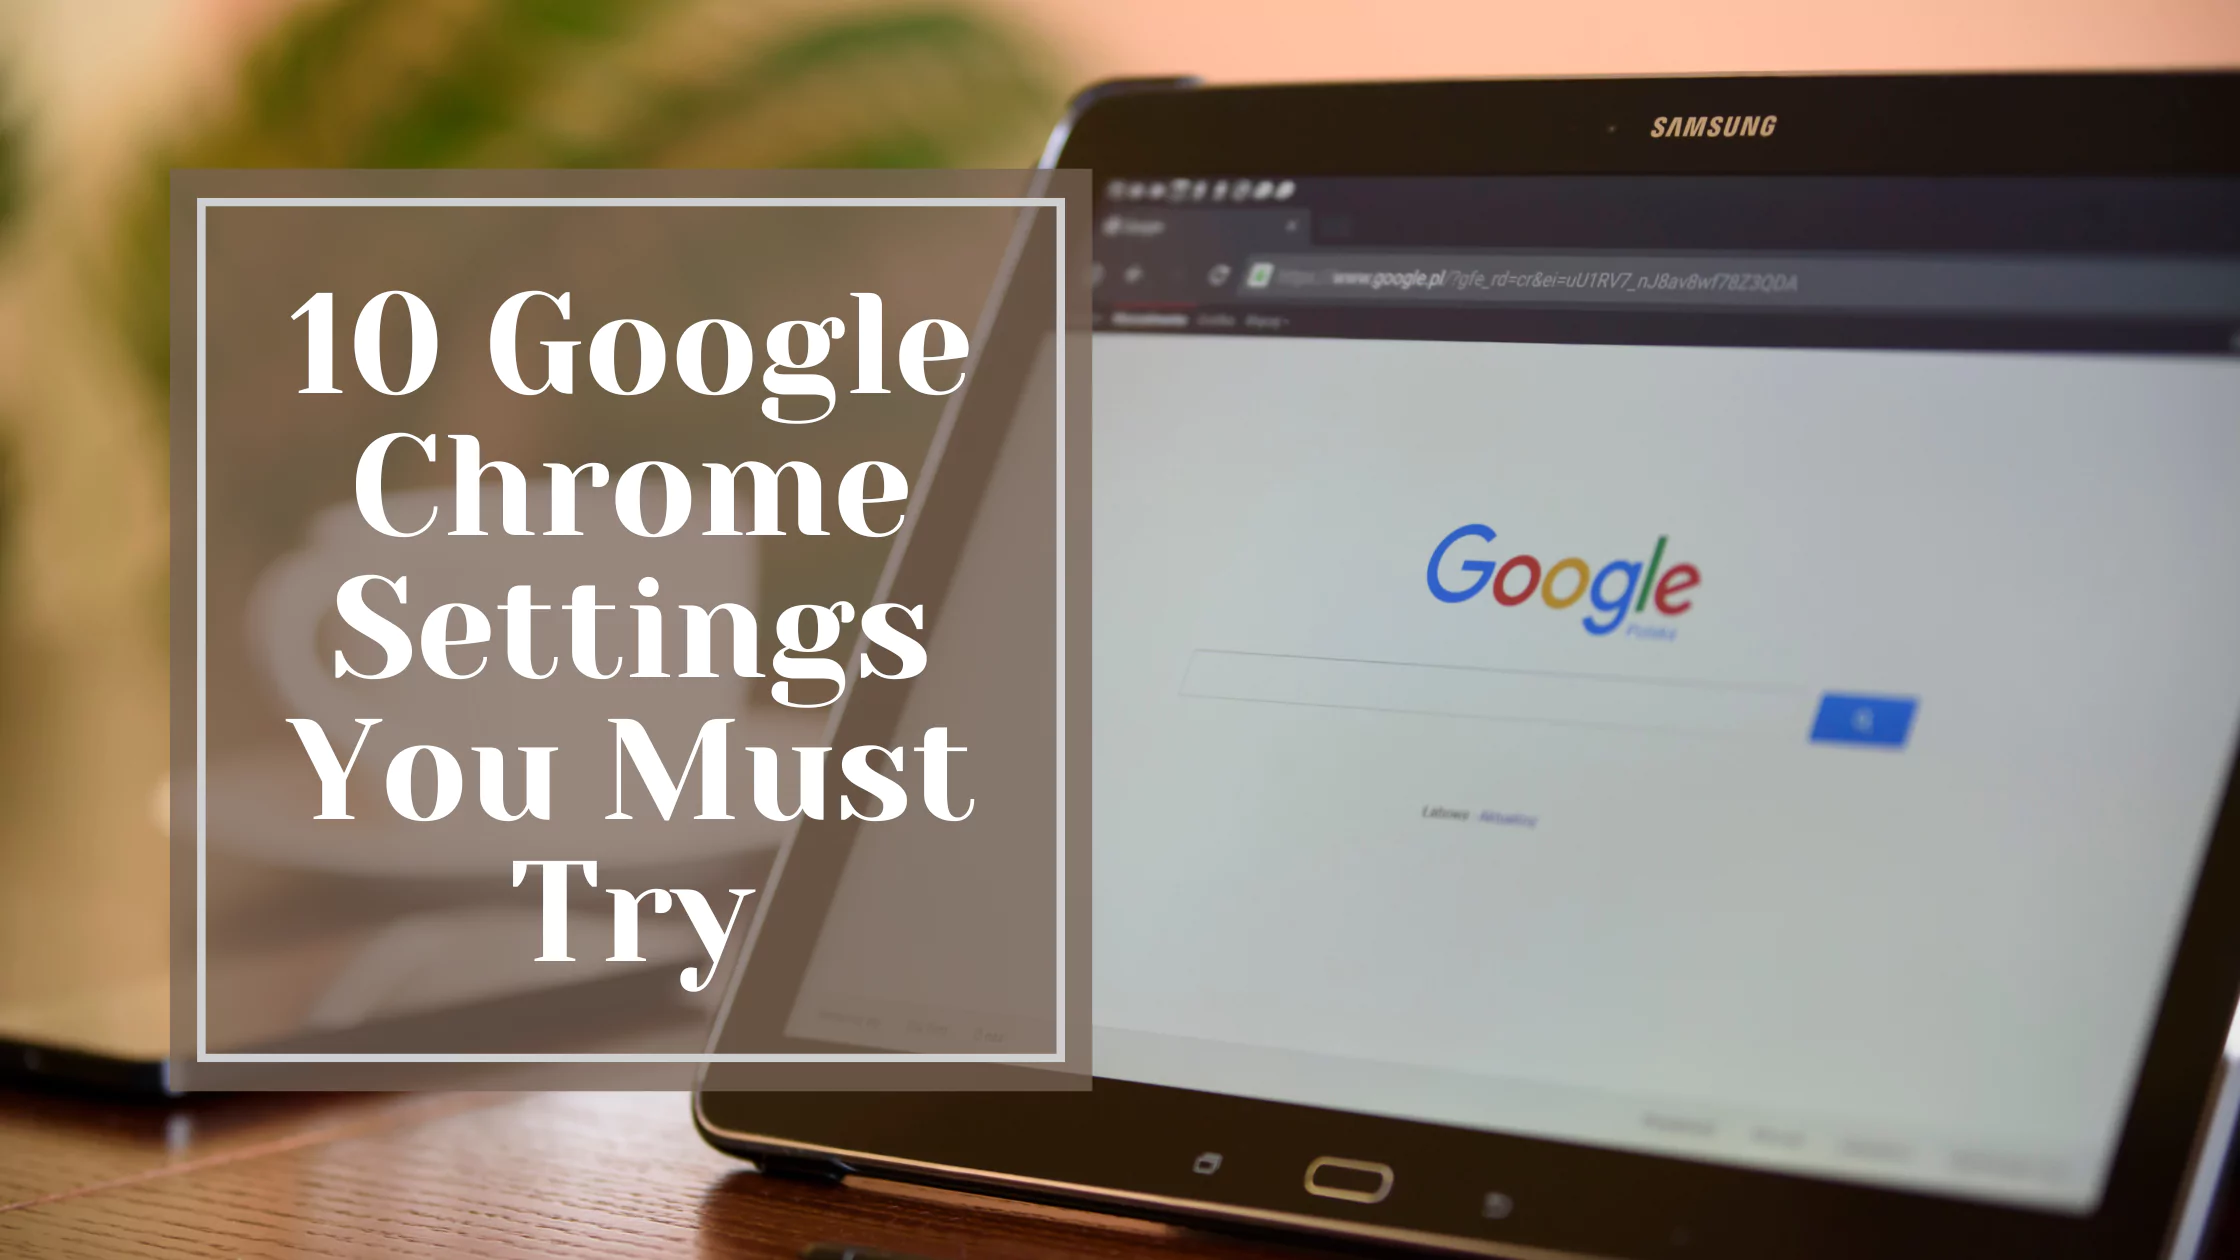 What Are The Best 10 Google Chrome Settings You Should Change